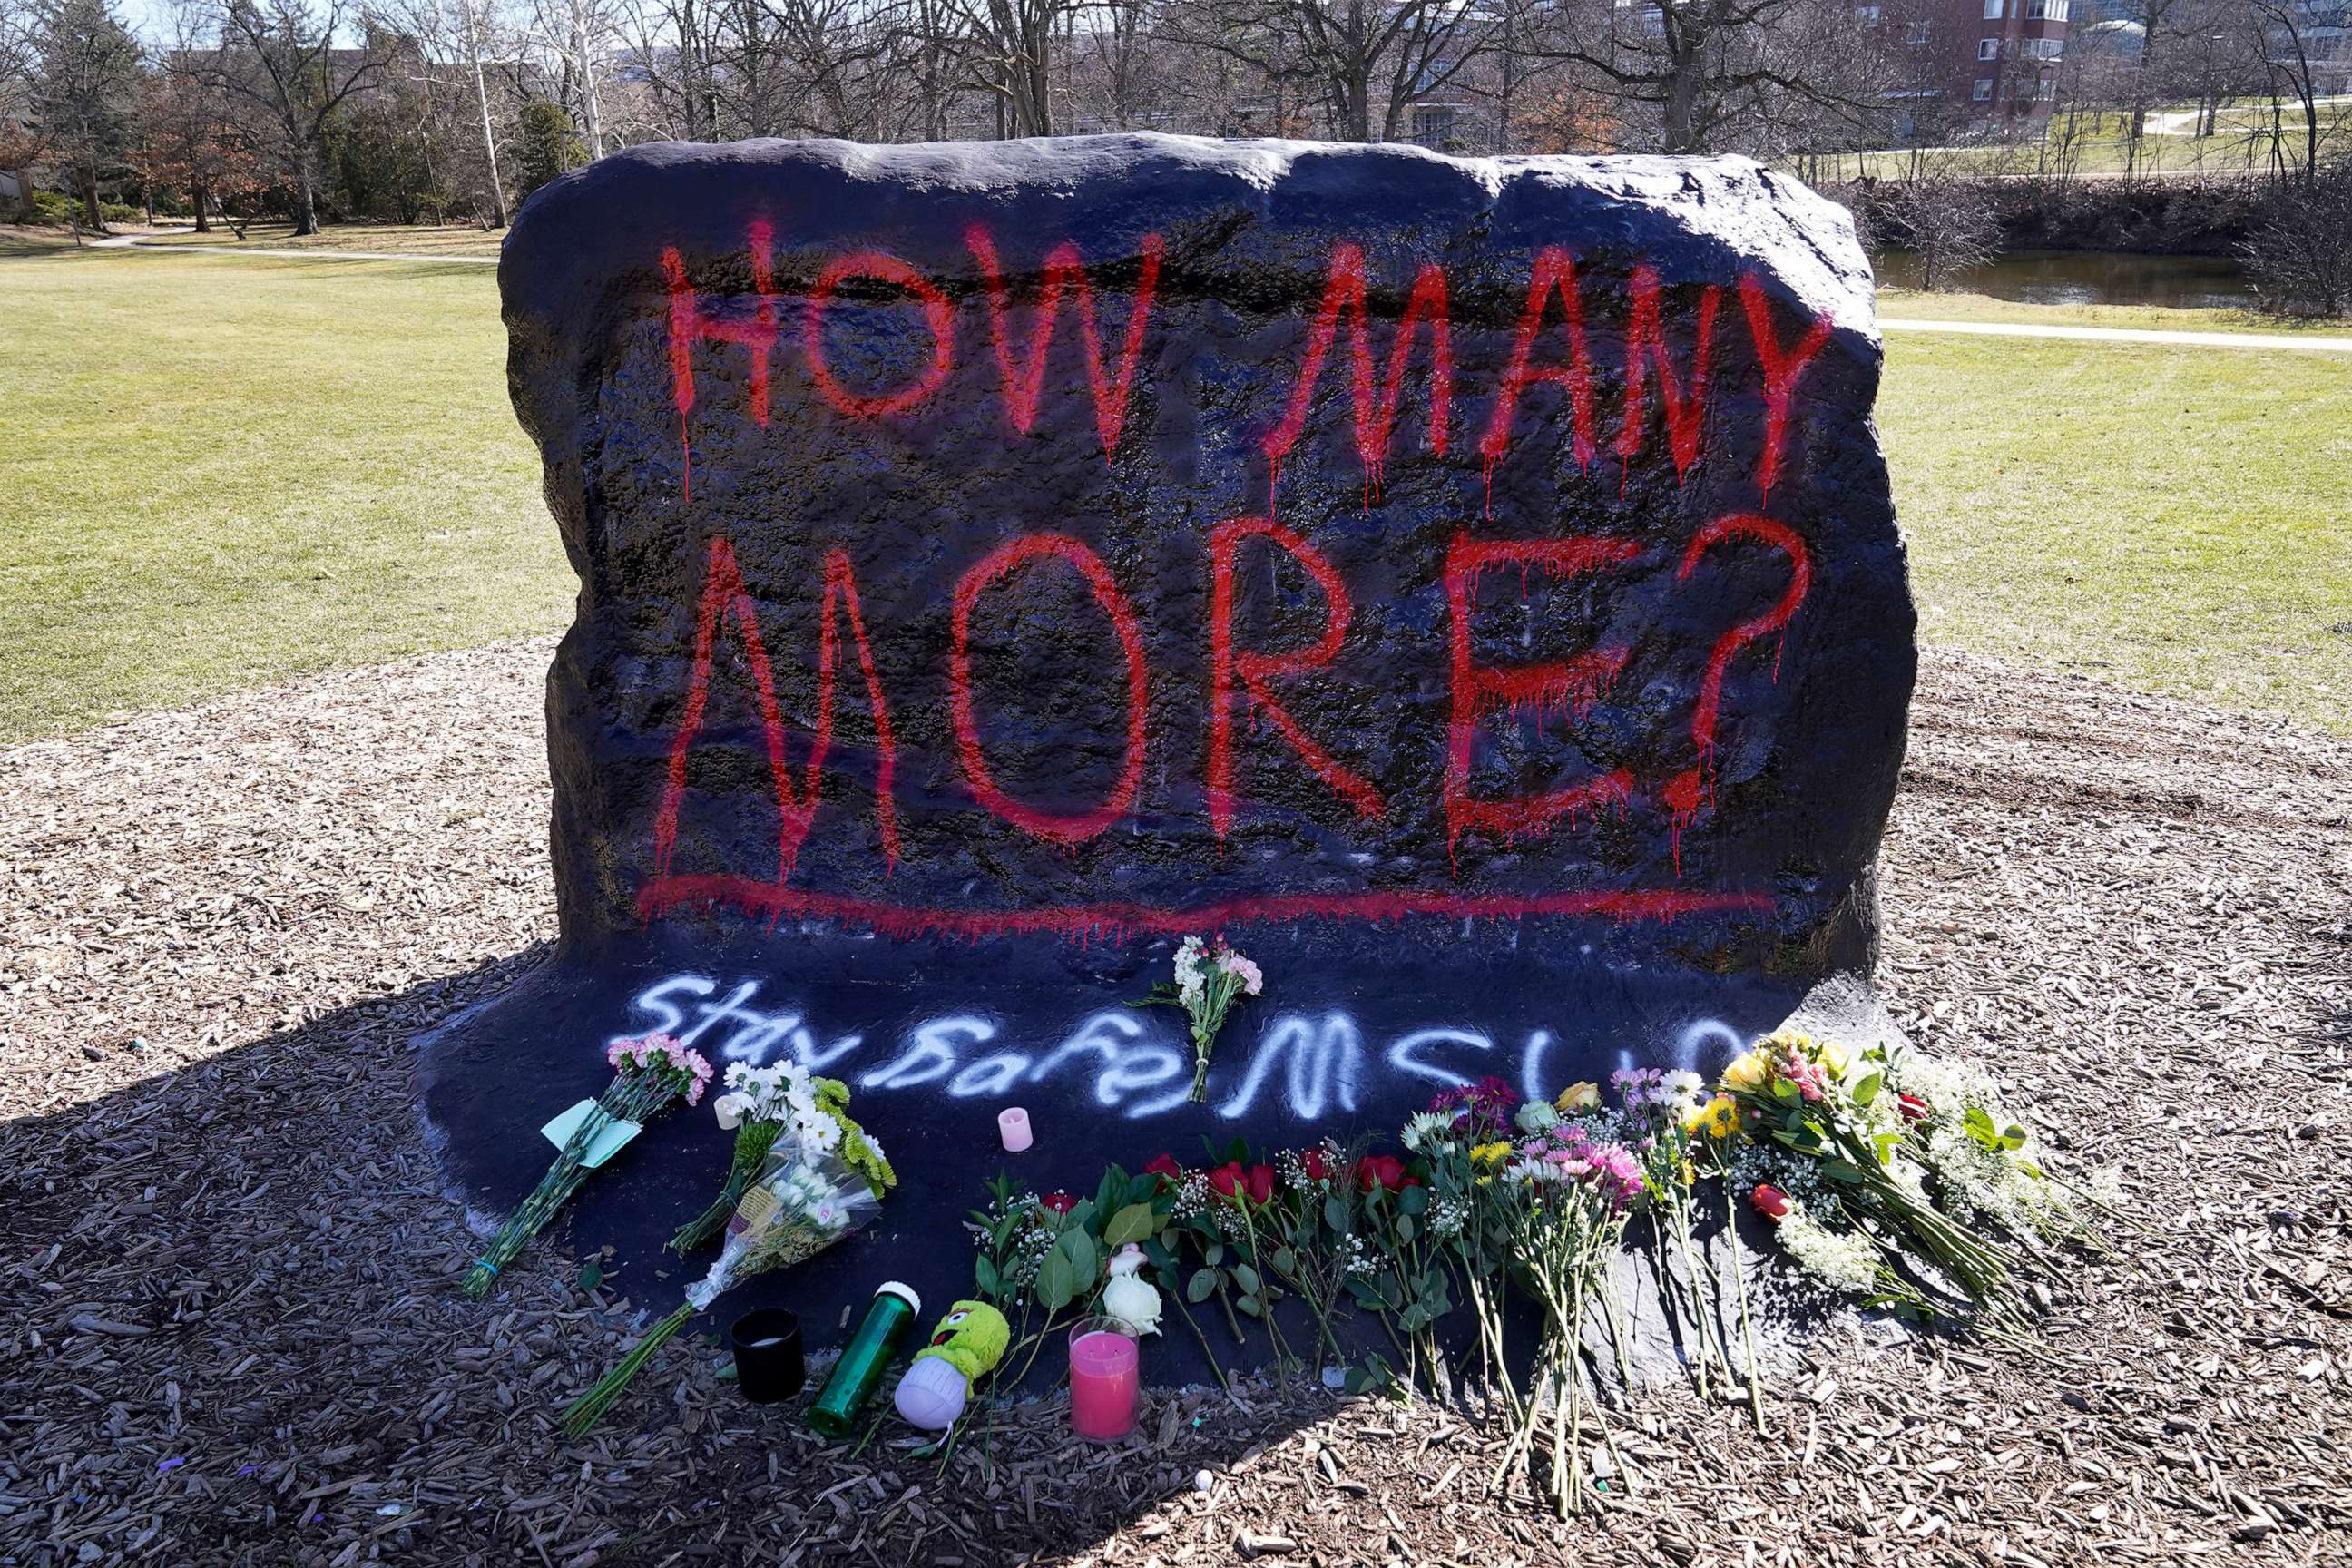 PHOTO: Flowers are displayed at The Rock at Michigan State University, on Feb. 14, 2023, in East Lansing, Mich.